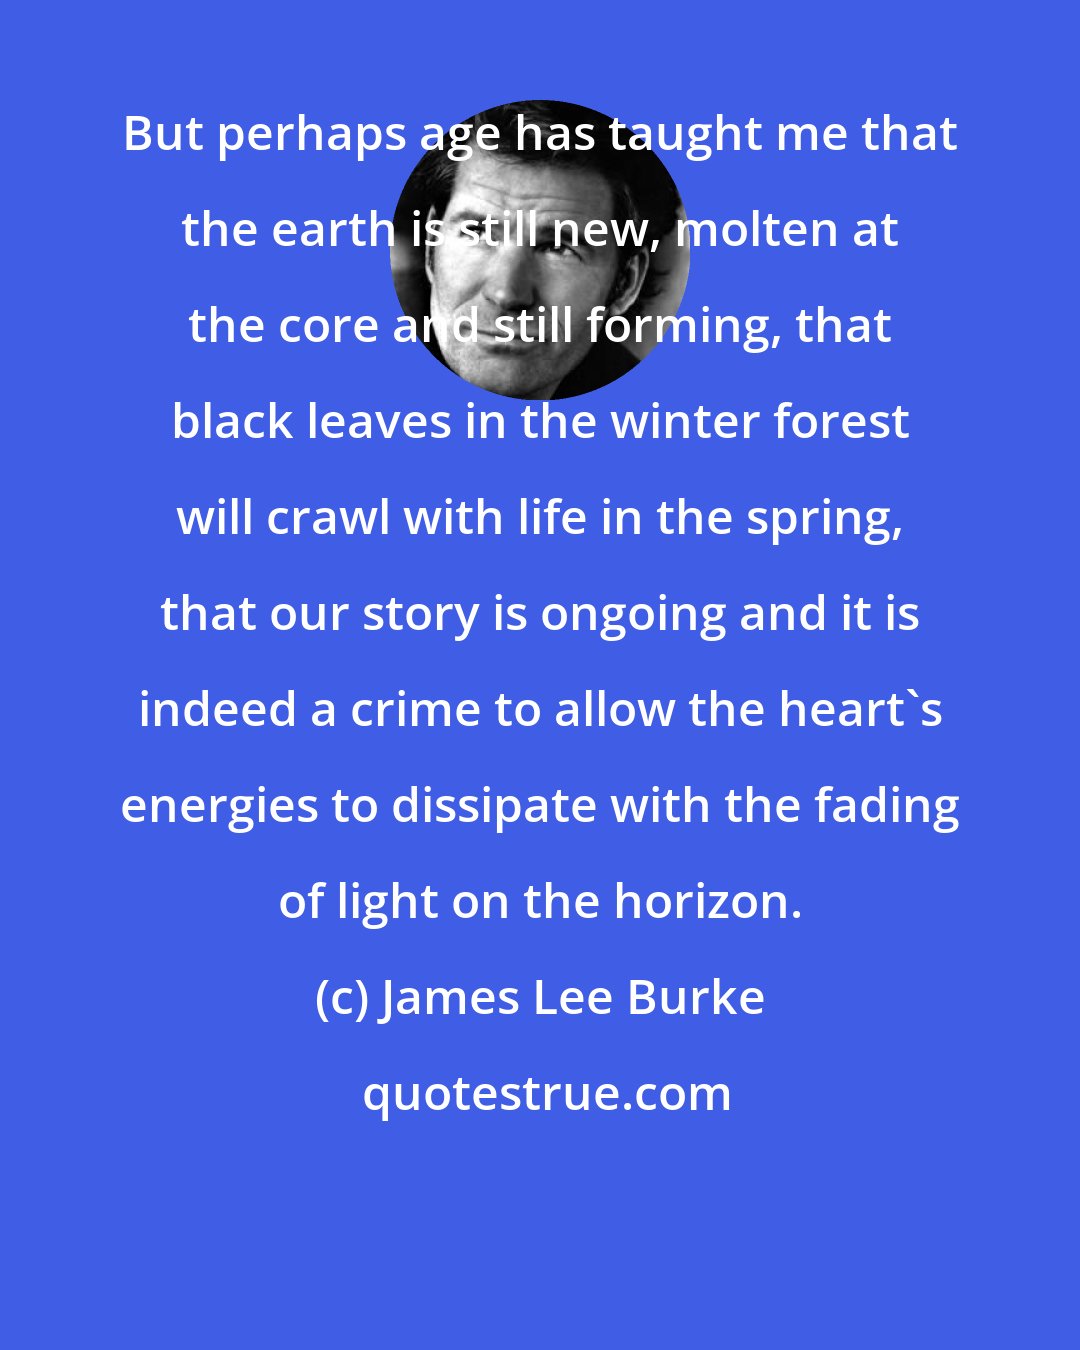 James Lee Burke: But perhaps age has taught me that the earth is still new, molten at the core and still forming, that black leaves in the winter forest will crawl with life in the spring, that our story is ongoing and it is indeed a crime to allow the heart's energies to dissipate with the fading of light on the horizon.